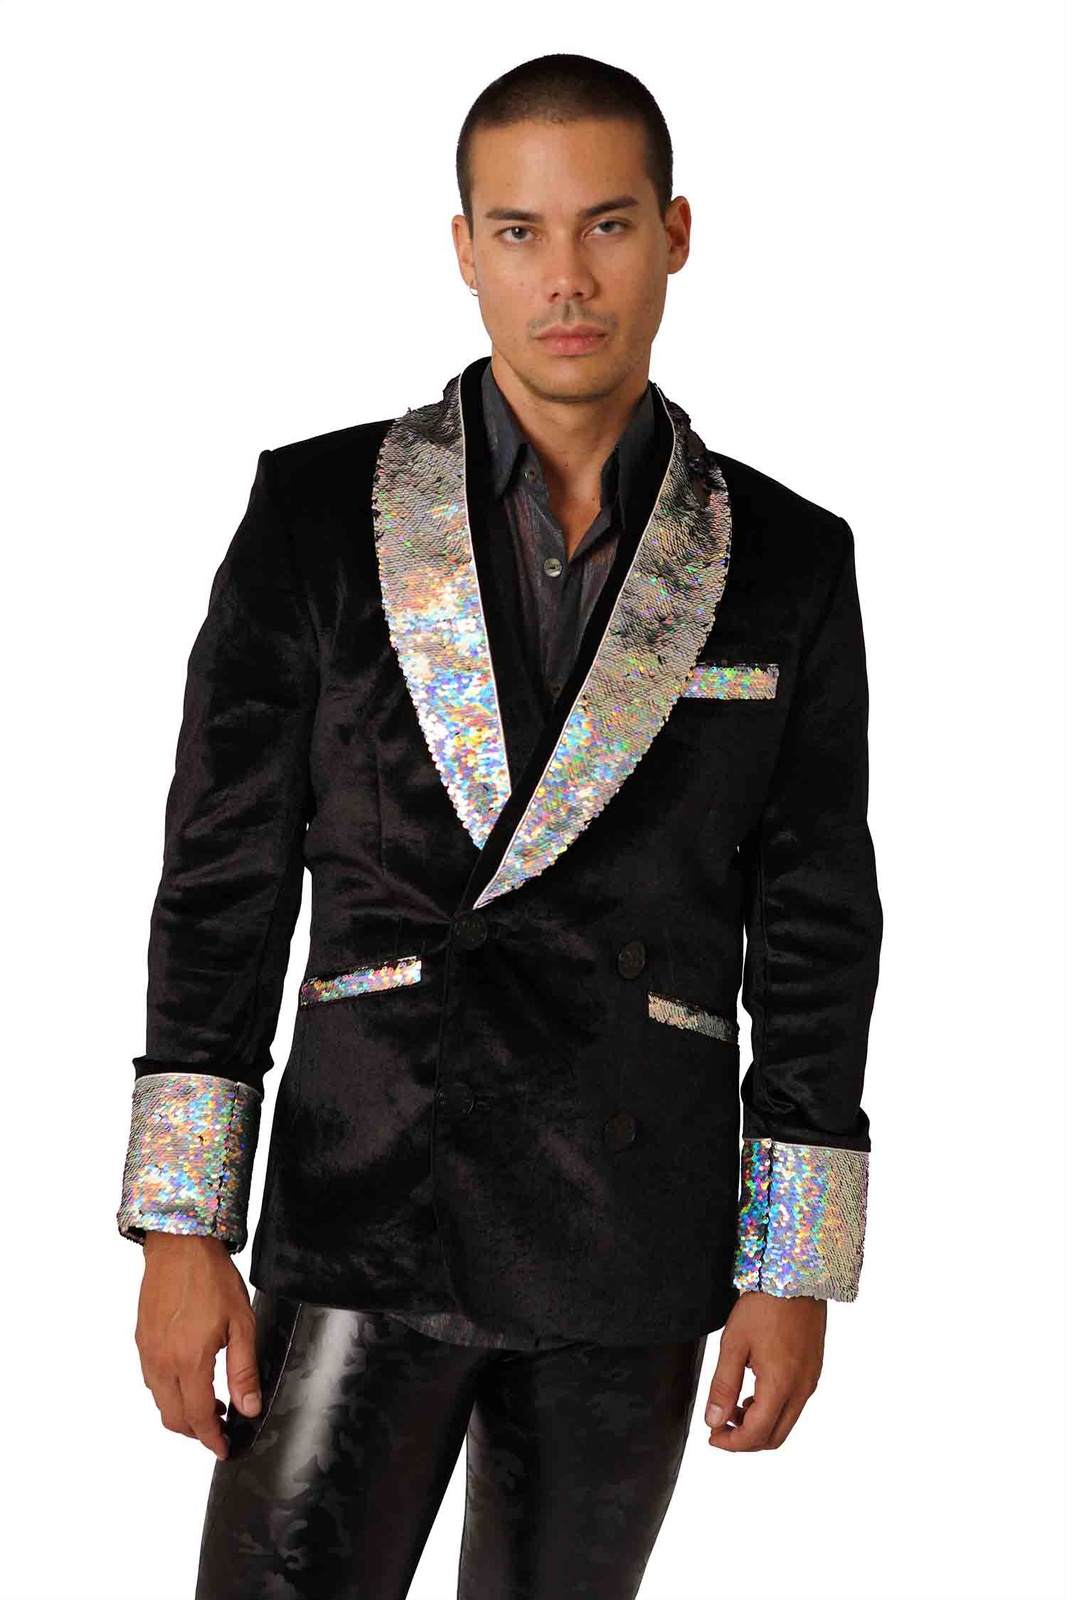 Black velvet smoking jacket with silver sequin collar and cuffs.